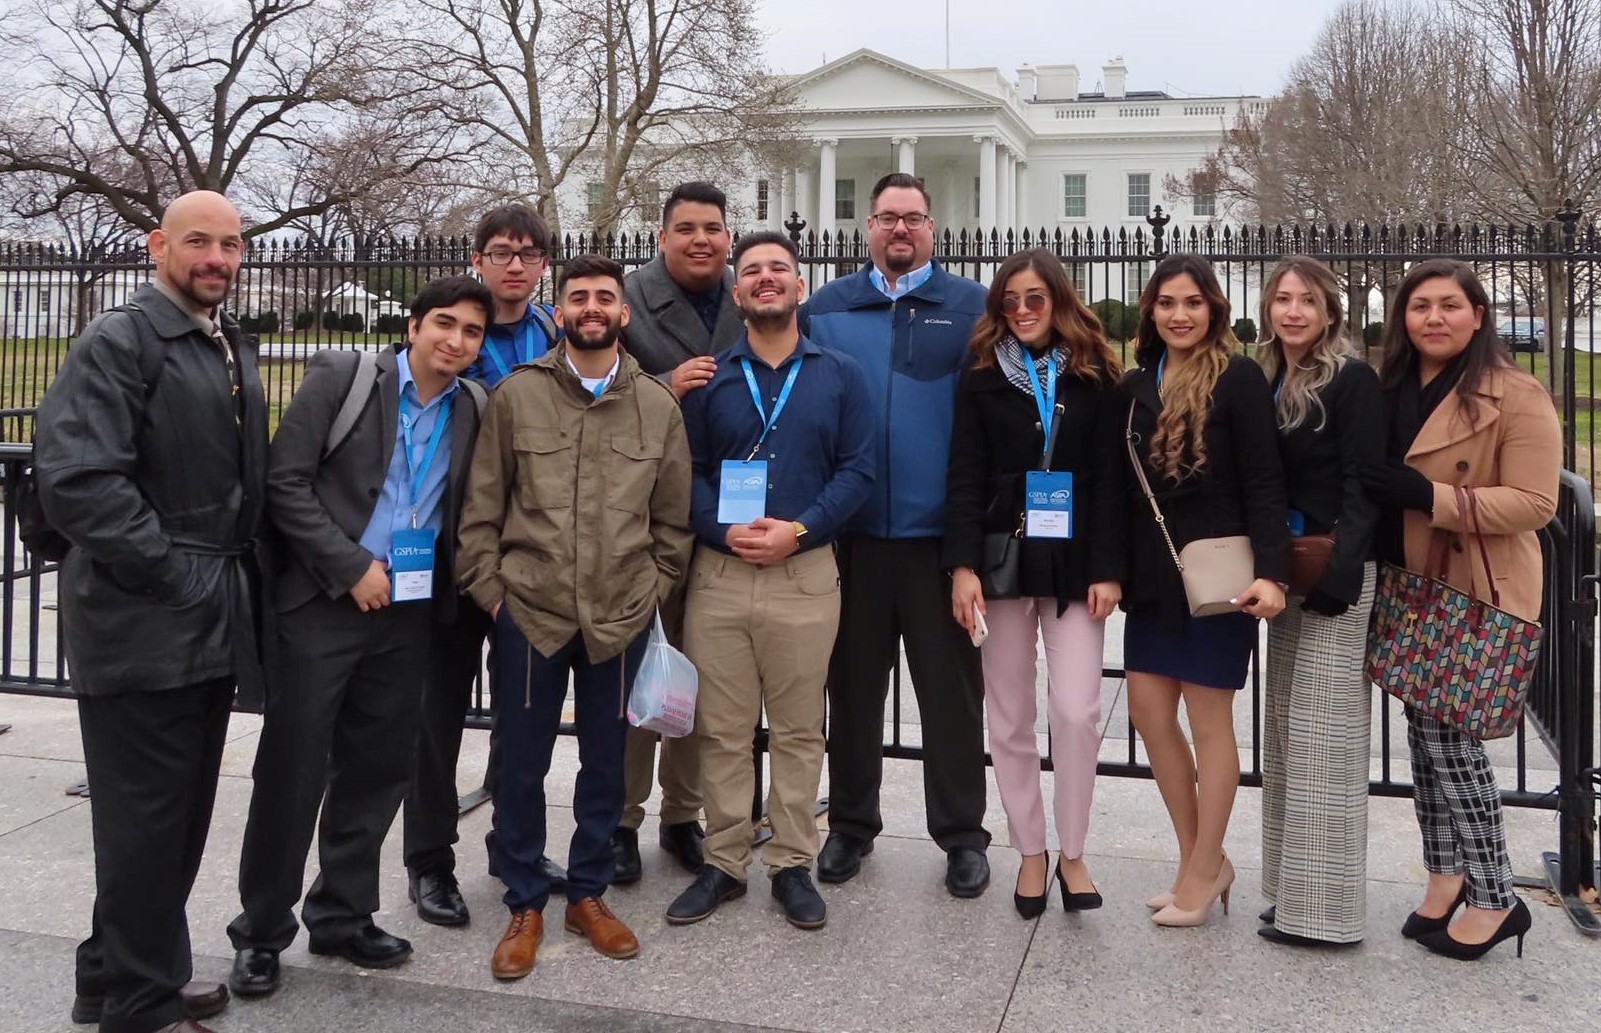 Students standing in front of White House